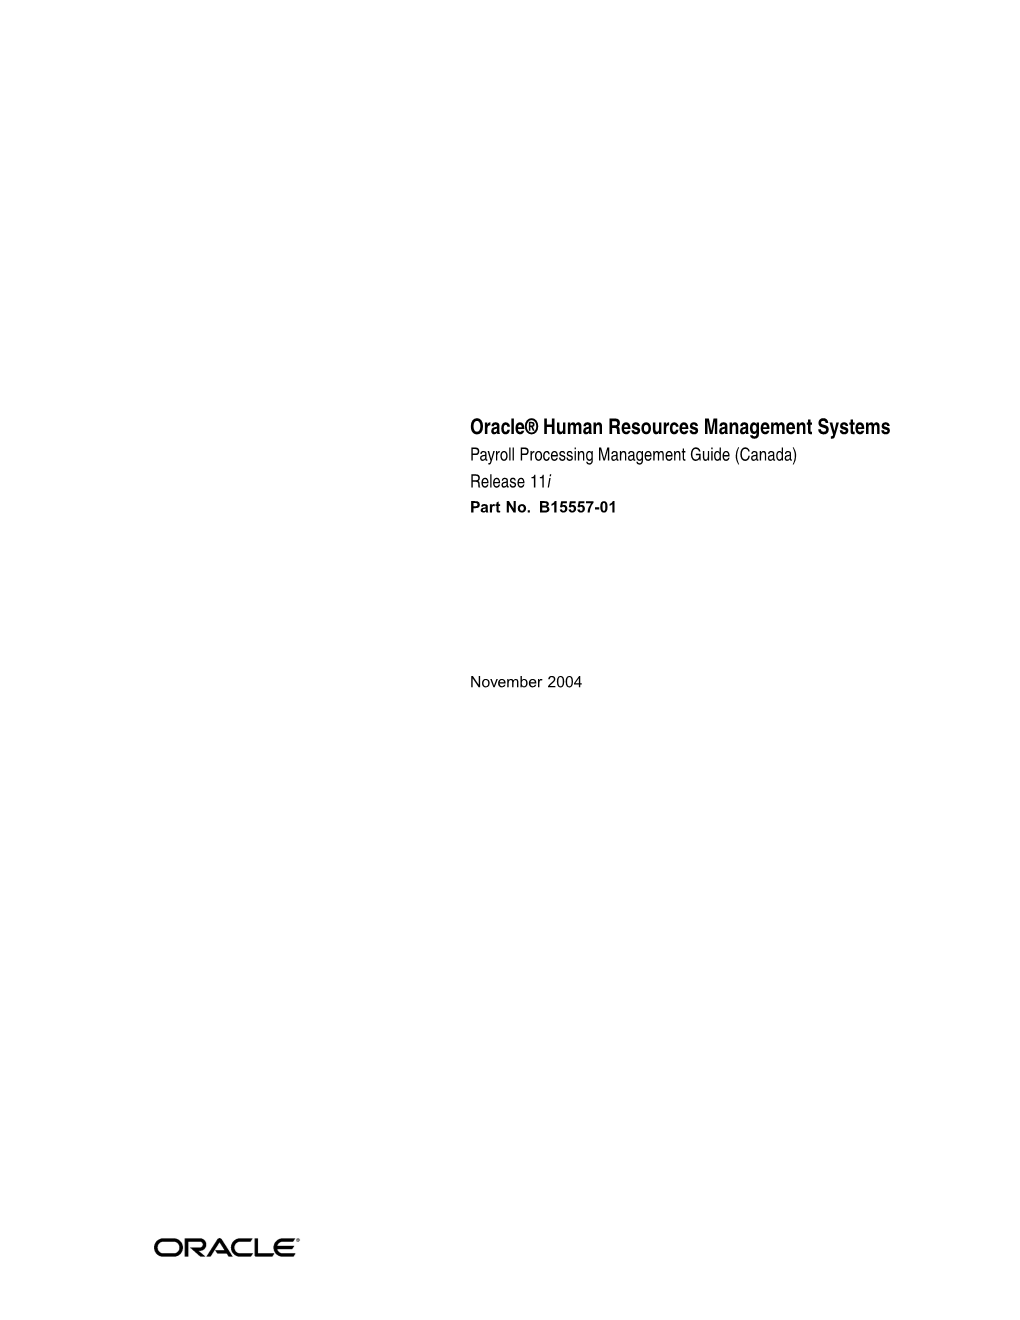 Oracle HRMS Payroll Processing Management Guide